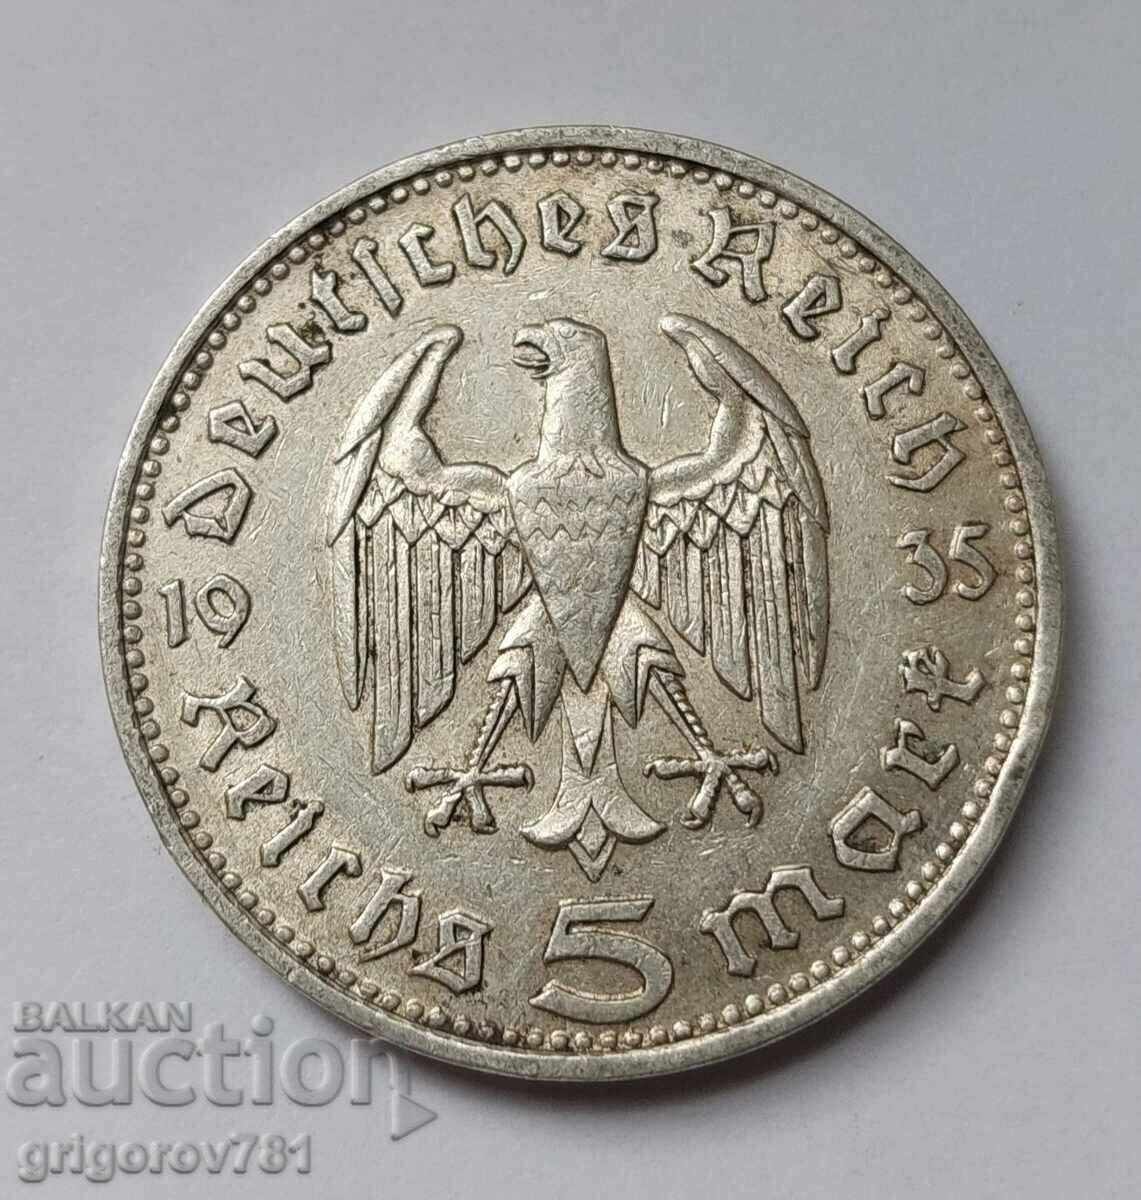 5 Mark Silver Germany 1935 D III Reich Silver Coin #22